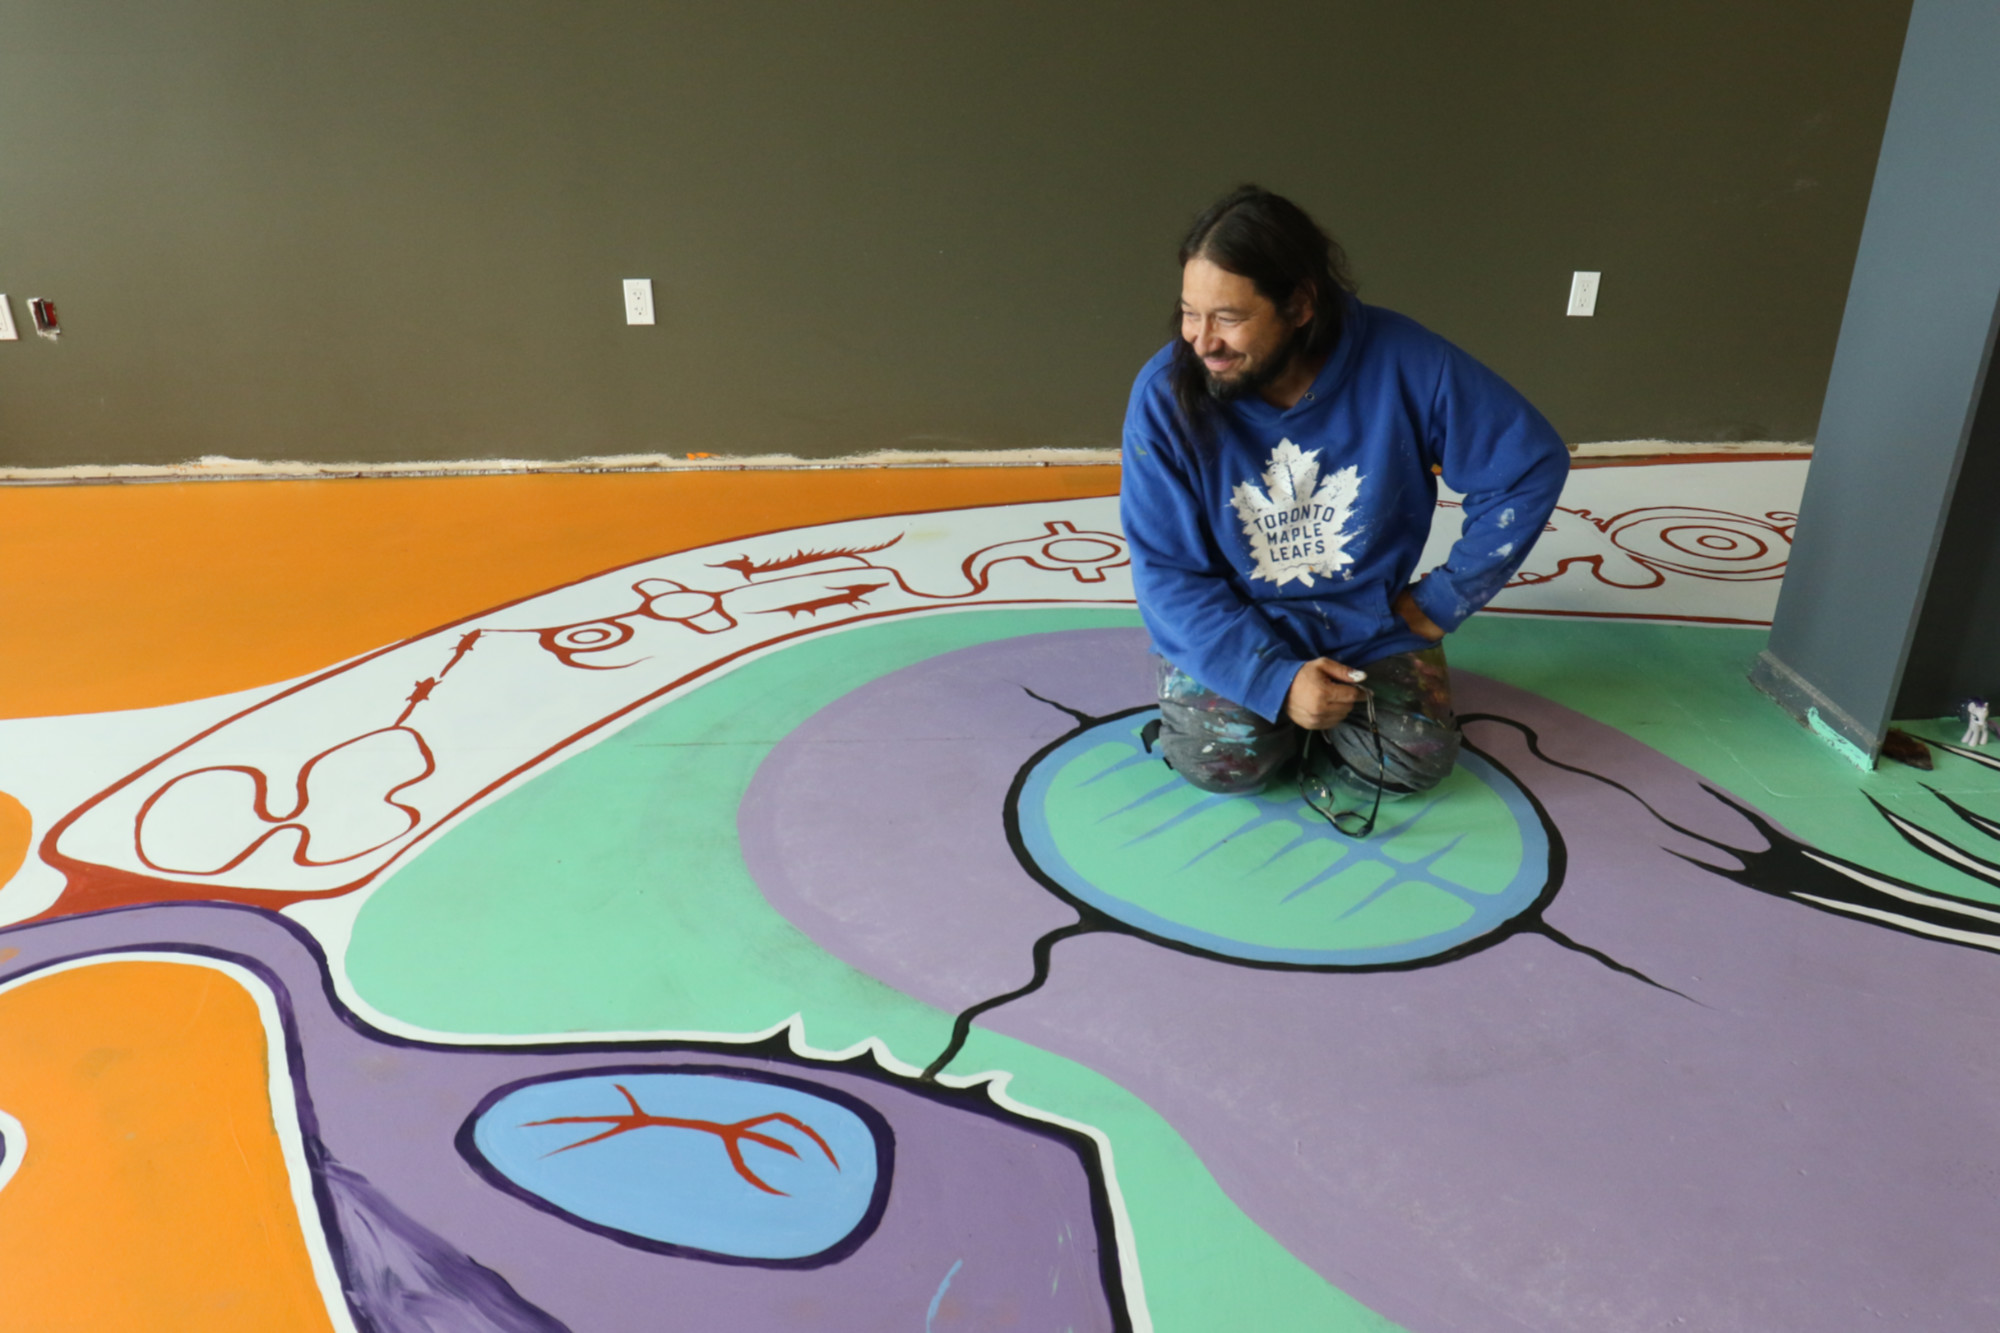 Toronto Maple Leafs sport work of local Indigenous artists